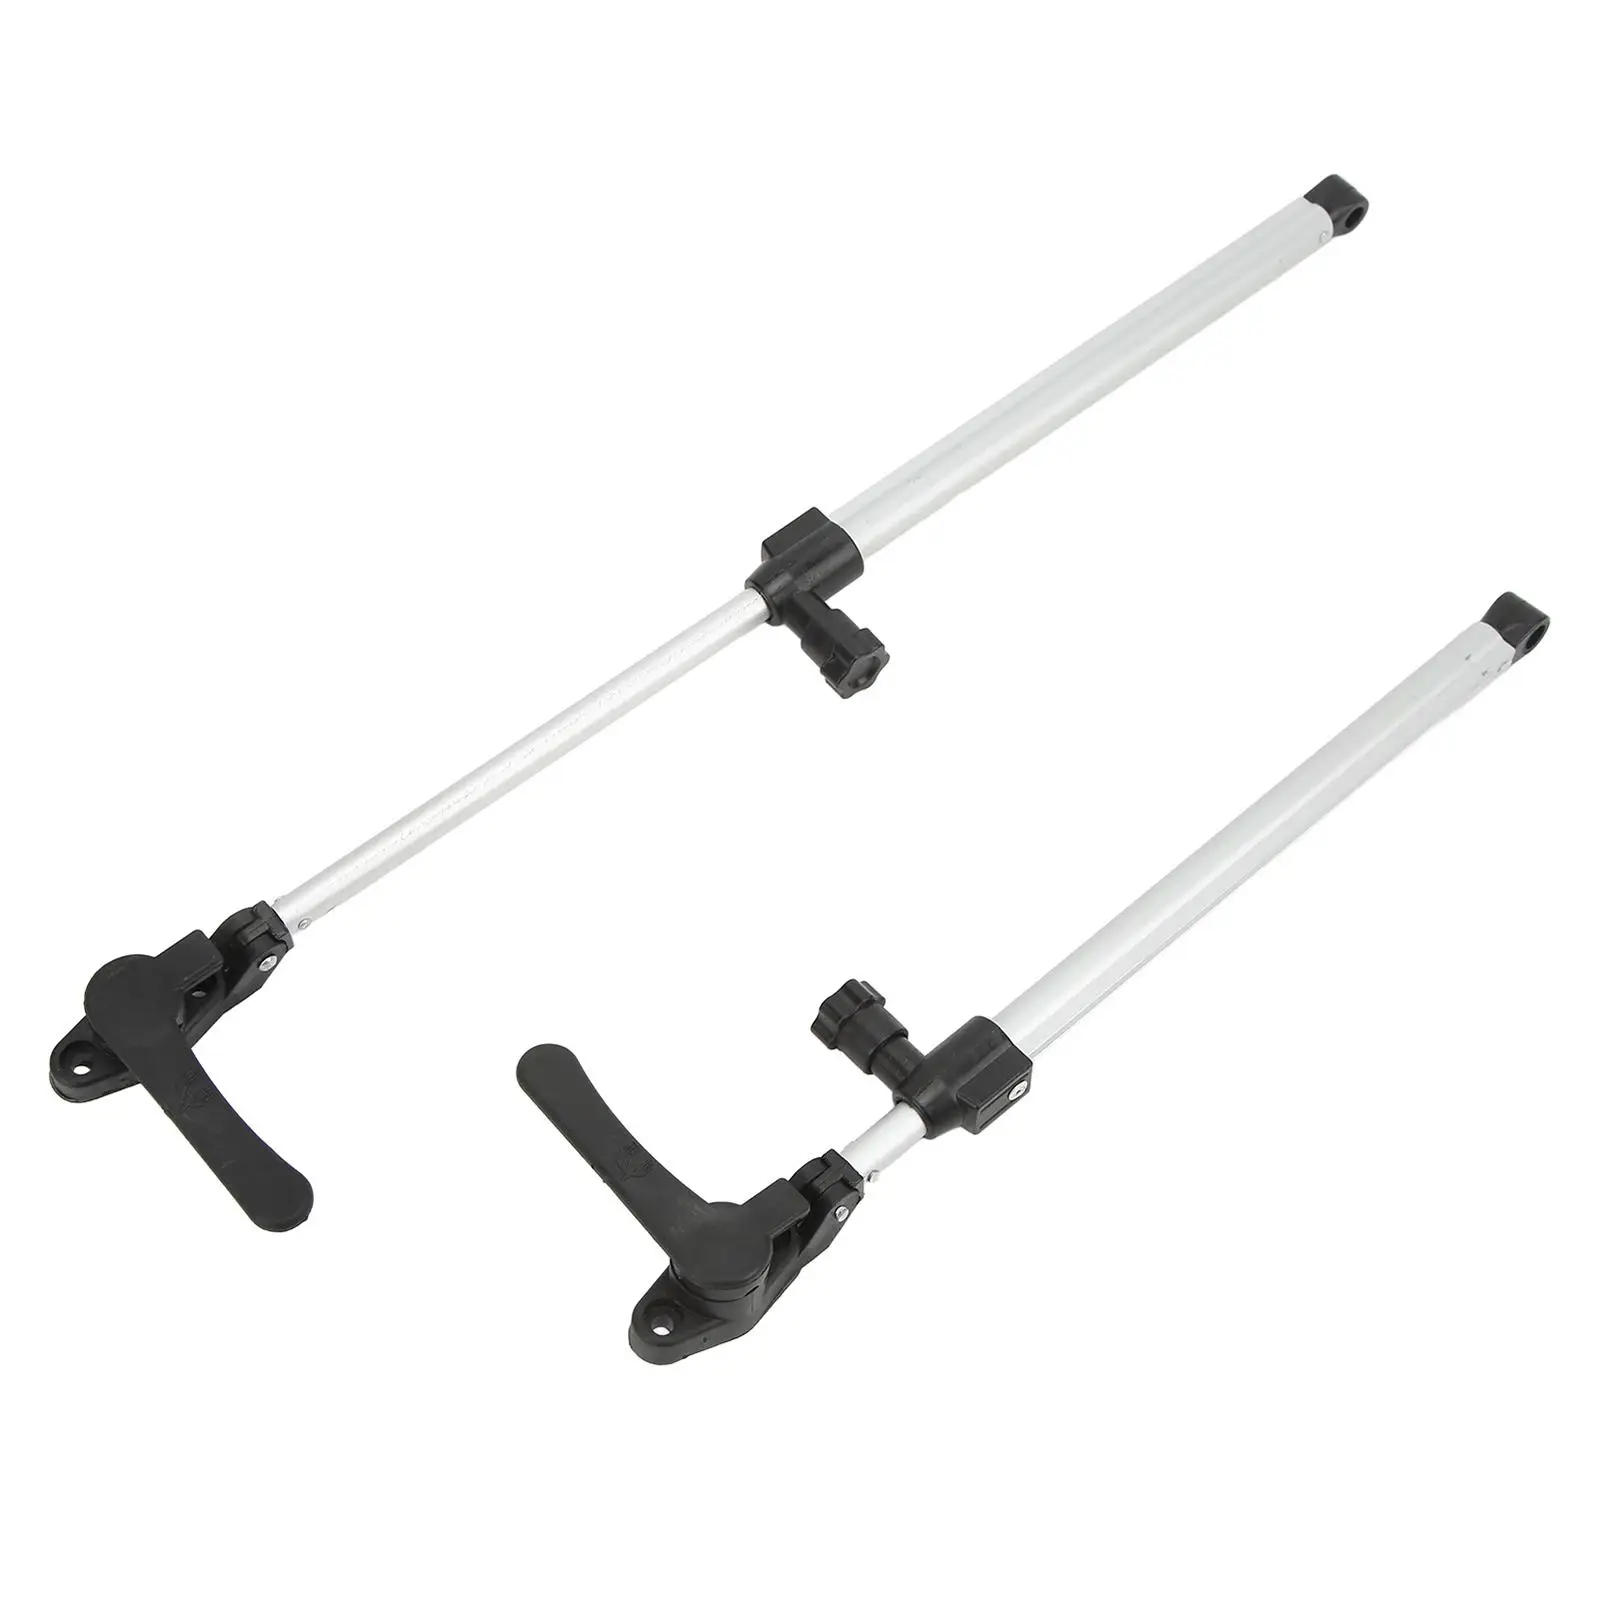 2 Pieces RV Window Support Rod Regulator Rod for Replacement